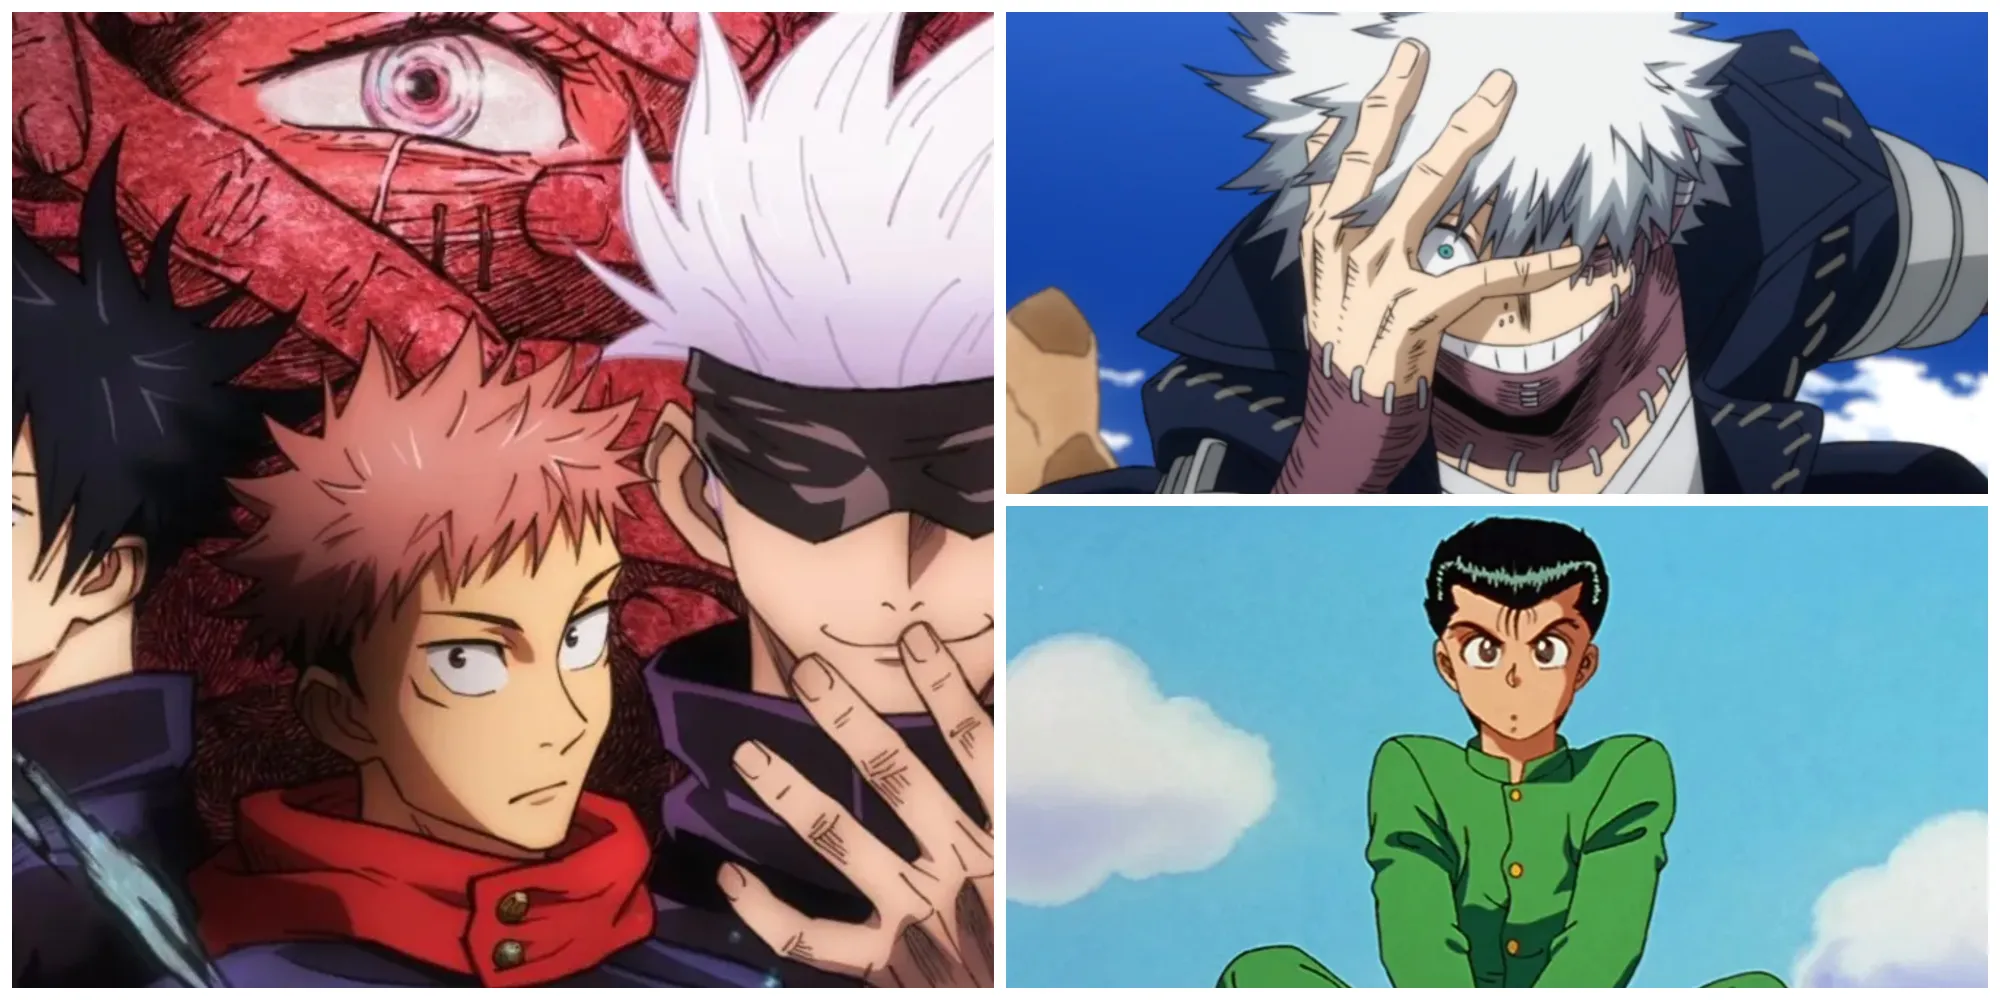 New Anime Buzz: Top Shows to Watch After the Jujutsu Kaisen Season 2 Finale